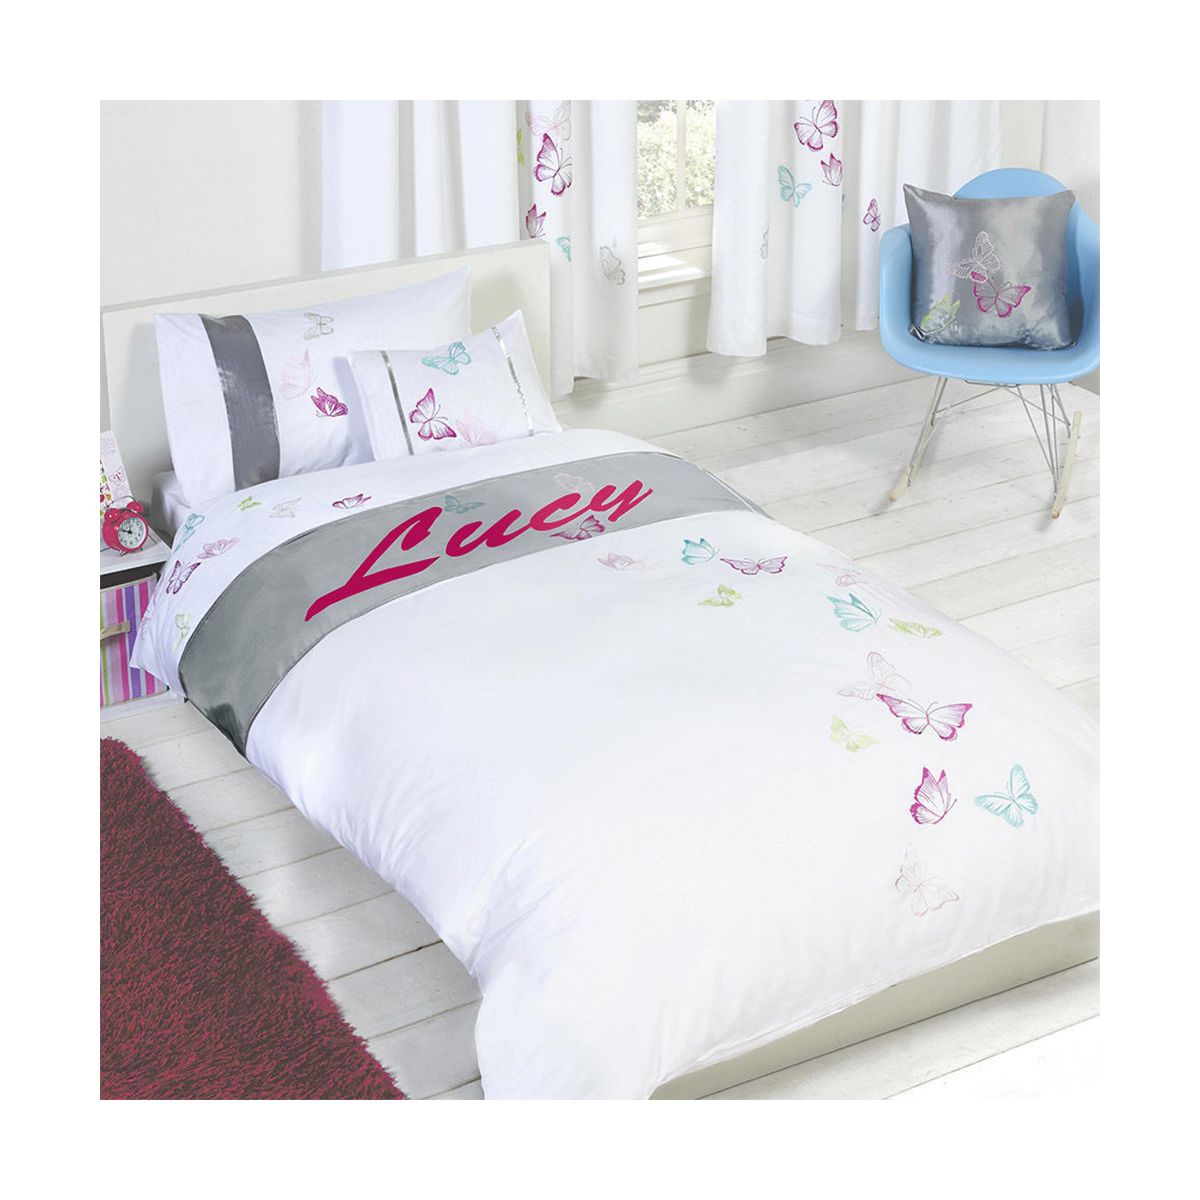 Lucy - Personalised Butterfly Duvet Cover Set